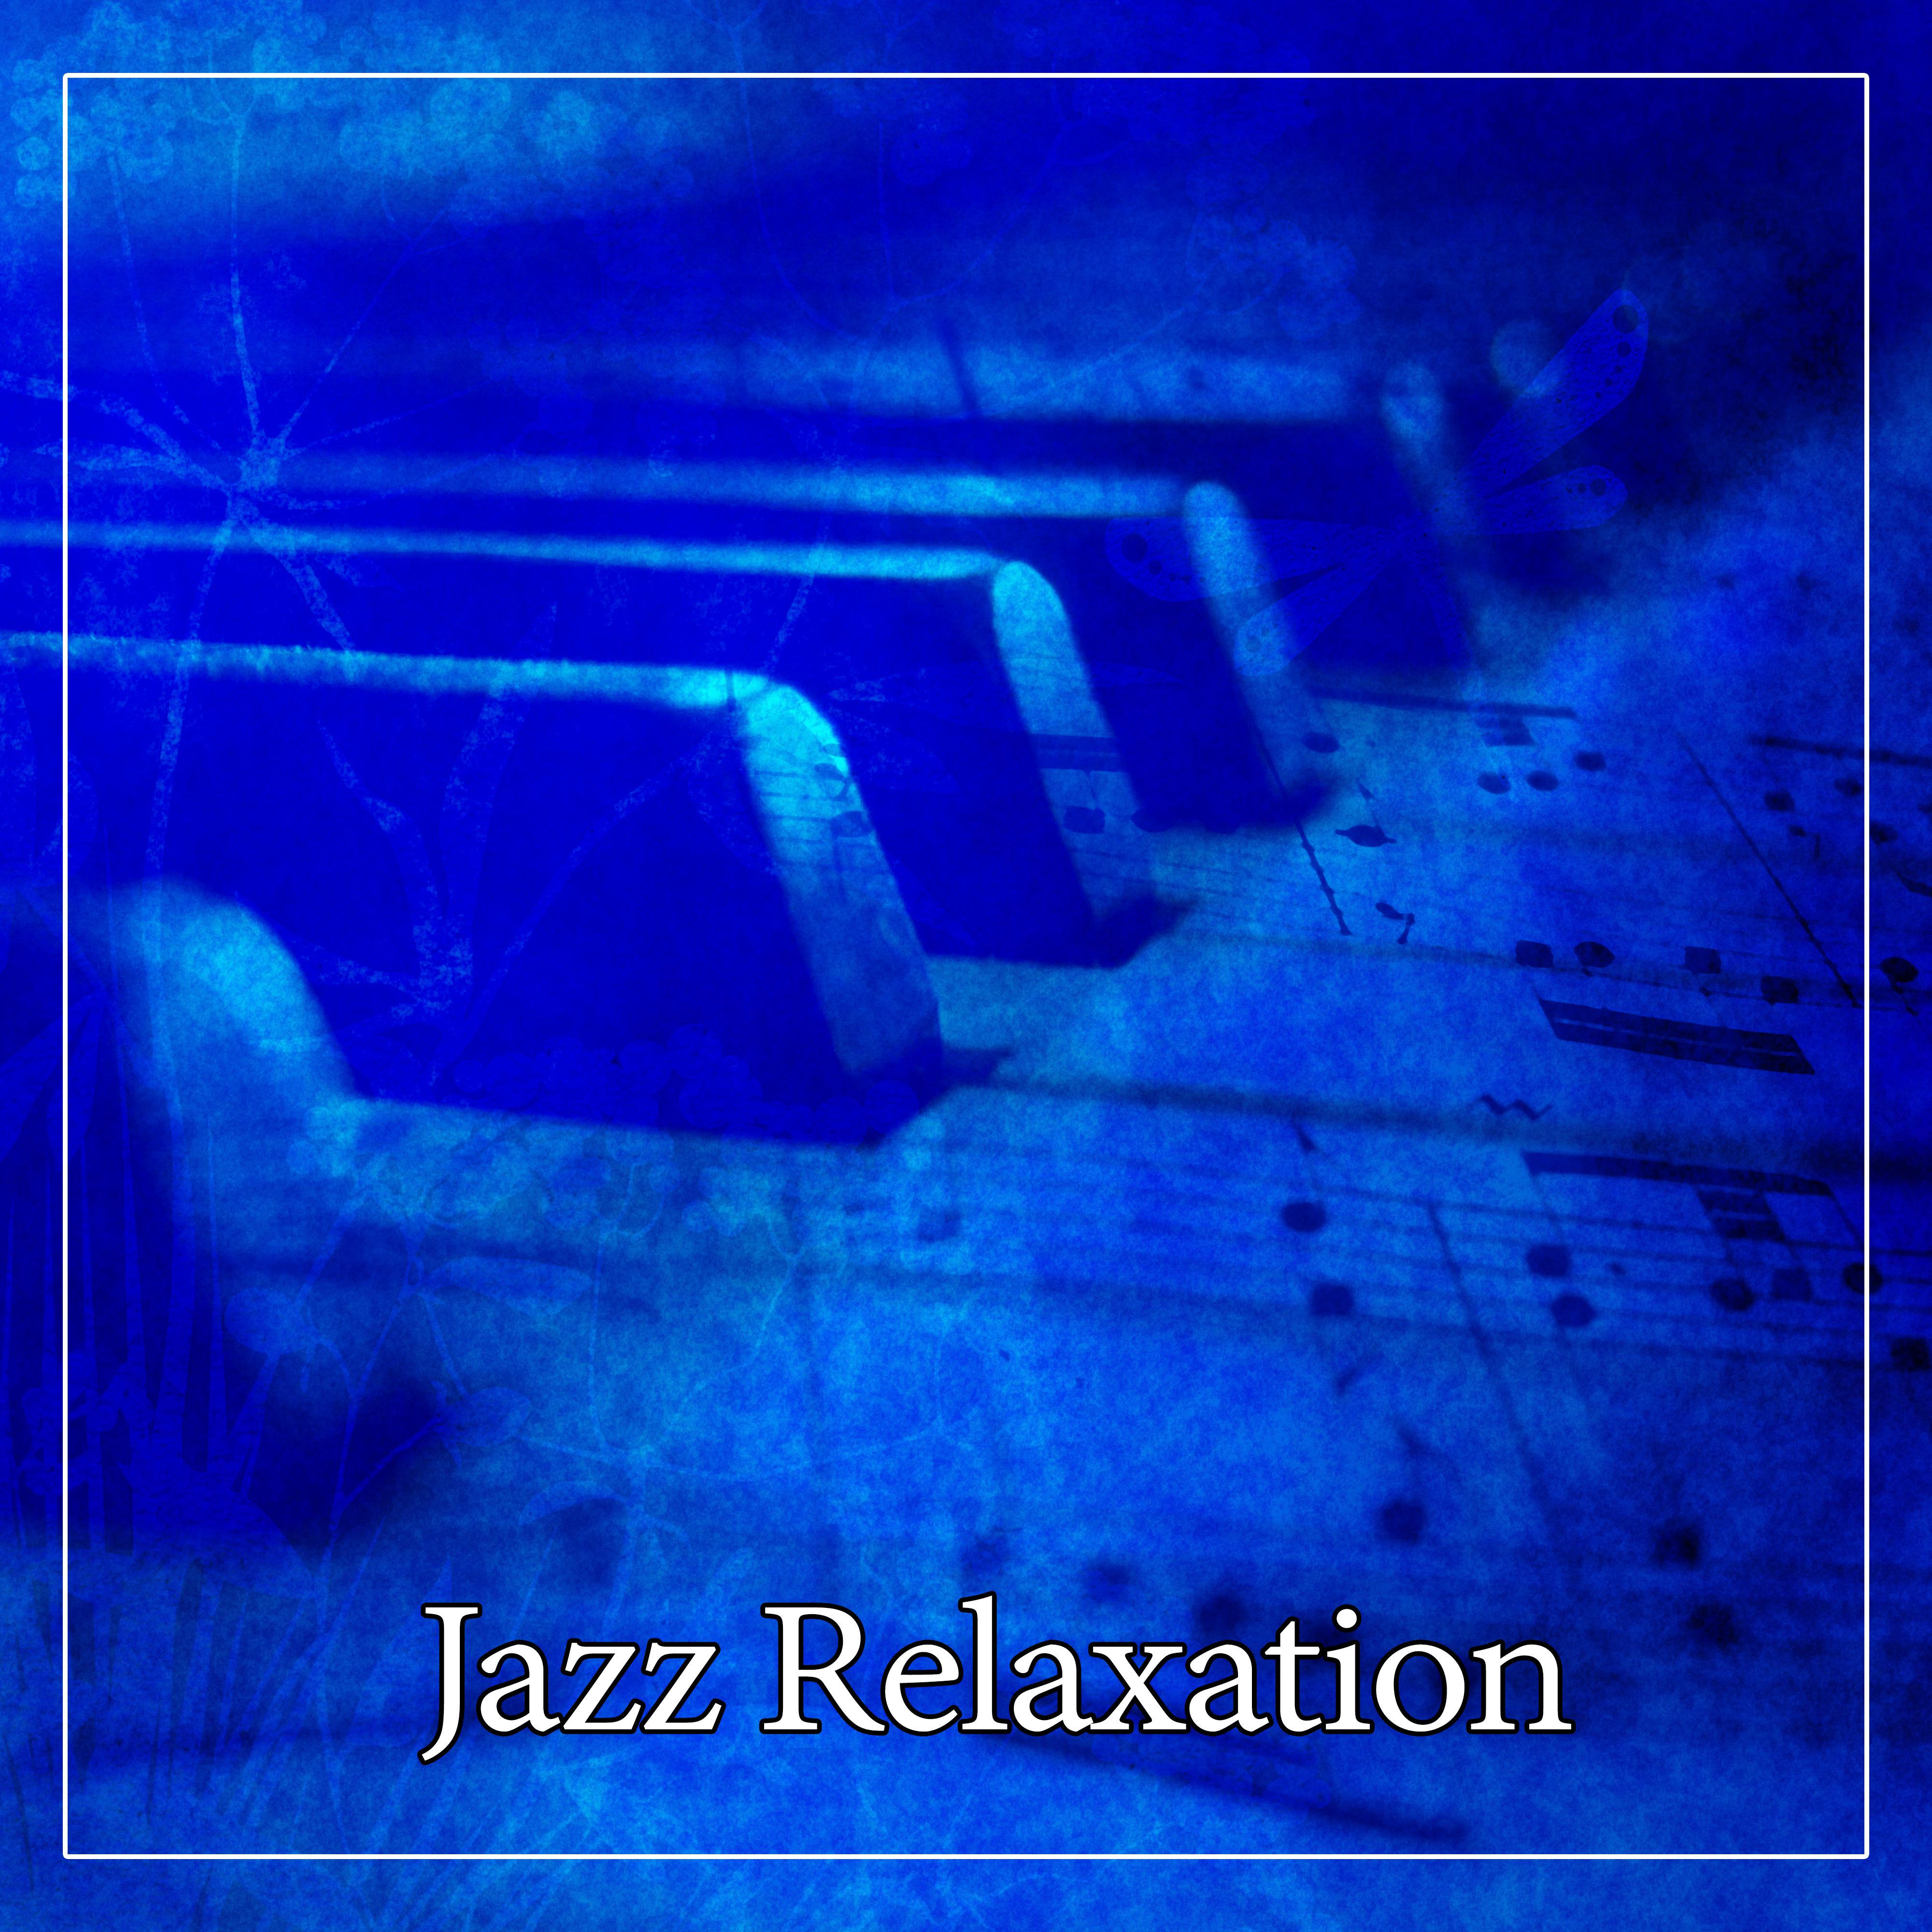 Jazz Relaxation  Calm Jazz Music, Soft Jazz Sounds, Ambient Music, Most Streaming Jazz Sounds